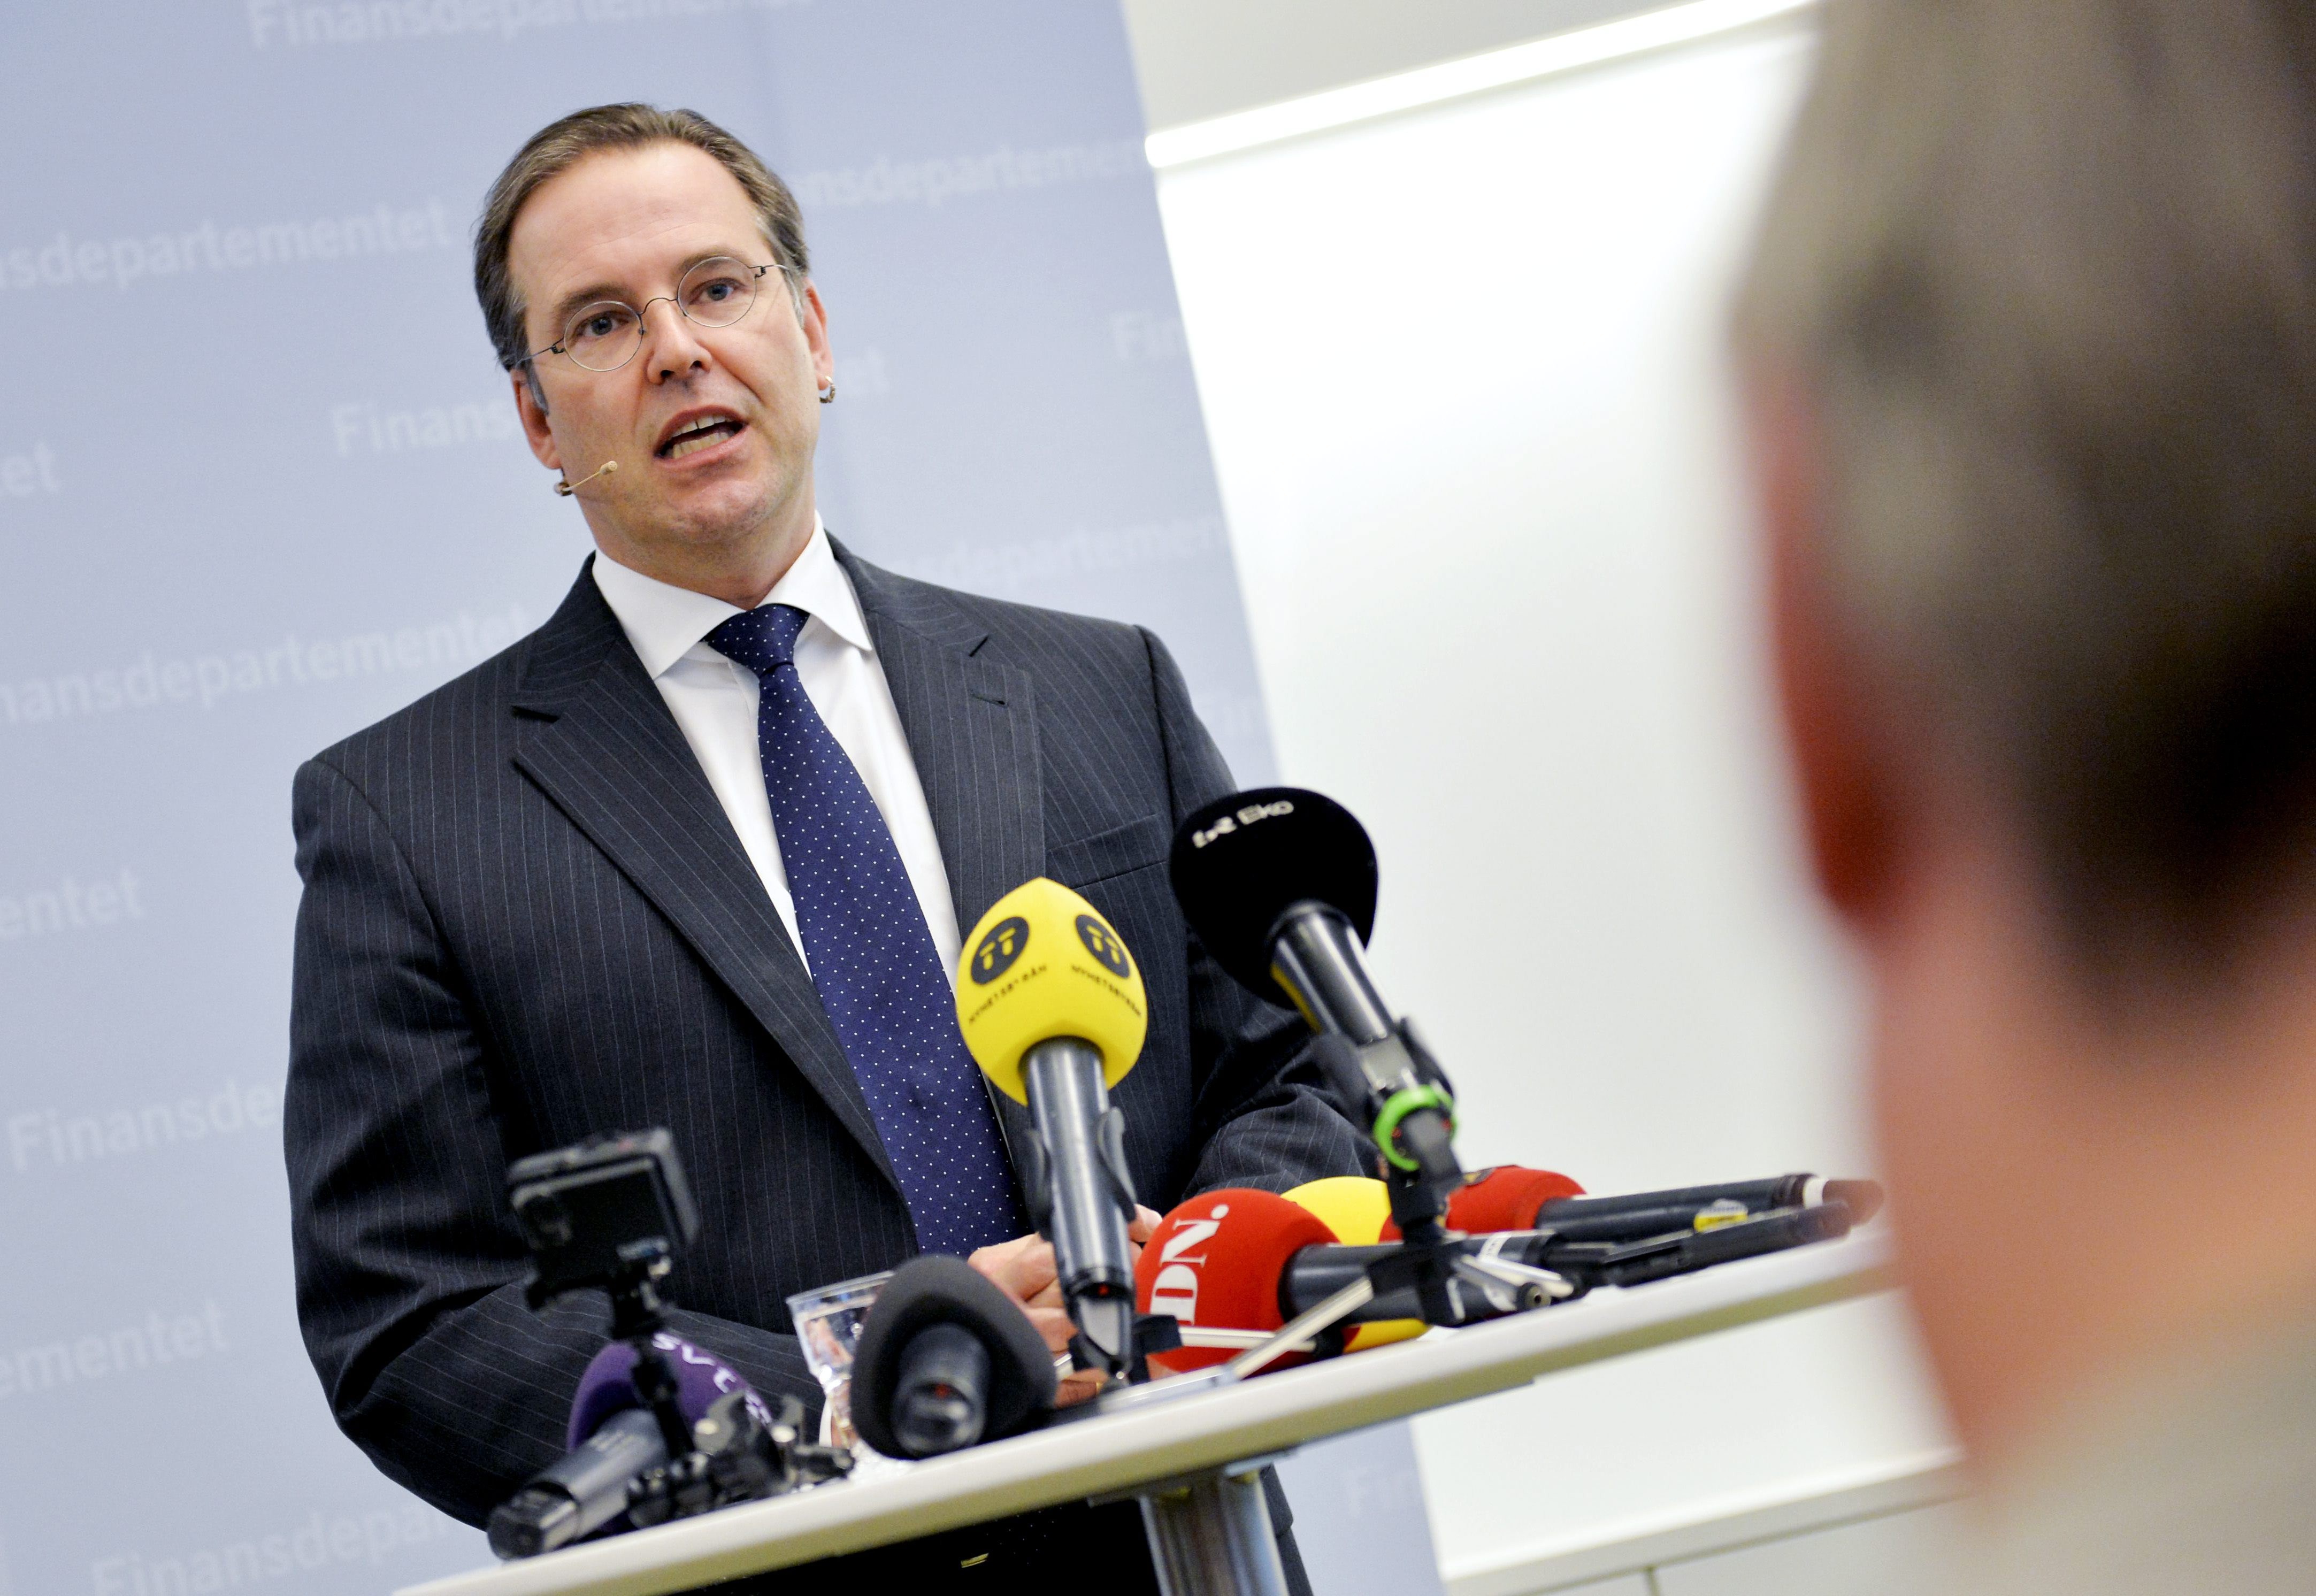 Anders Borg announces he is leaving politics, following the general election results in Stockholm on September 15, 2014. (Jonas Ekstromer/AFP/Getty Images) 